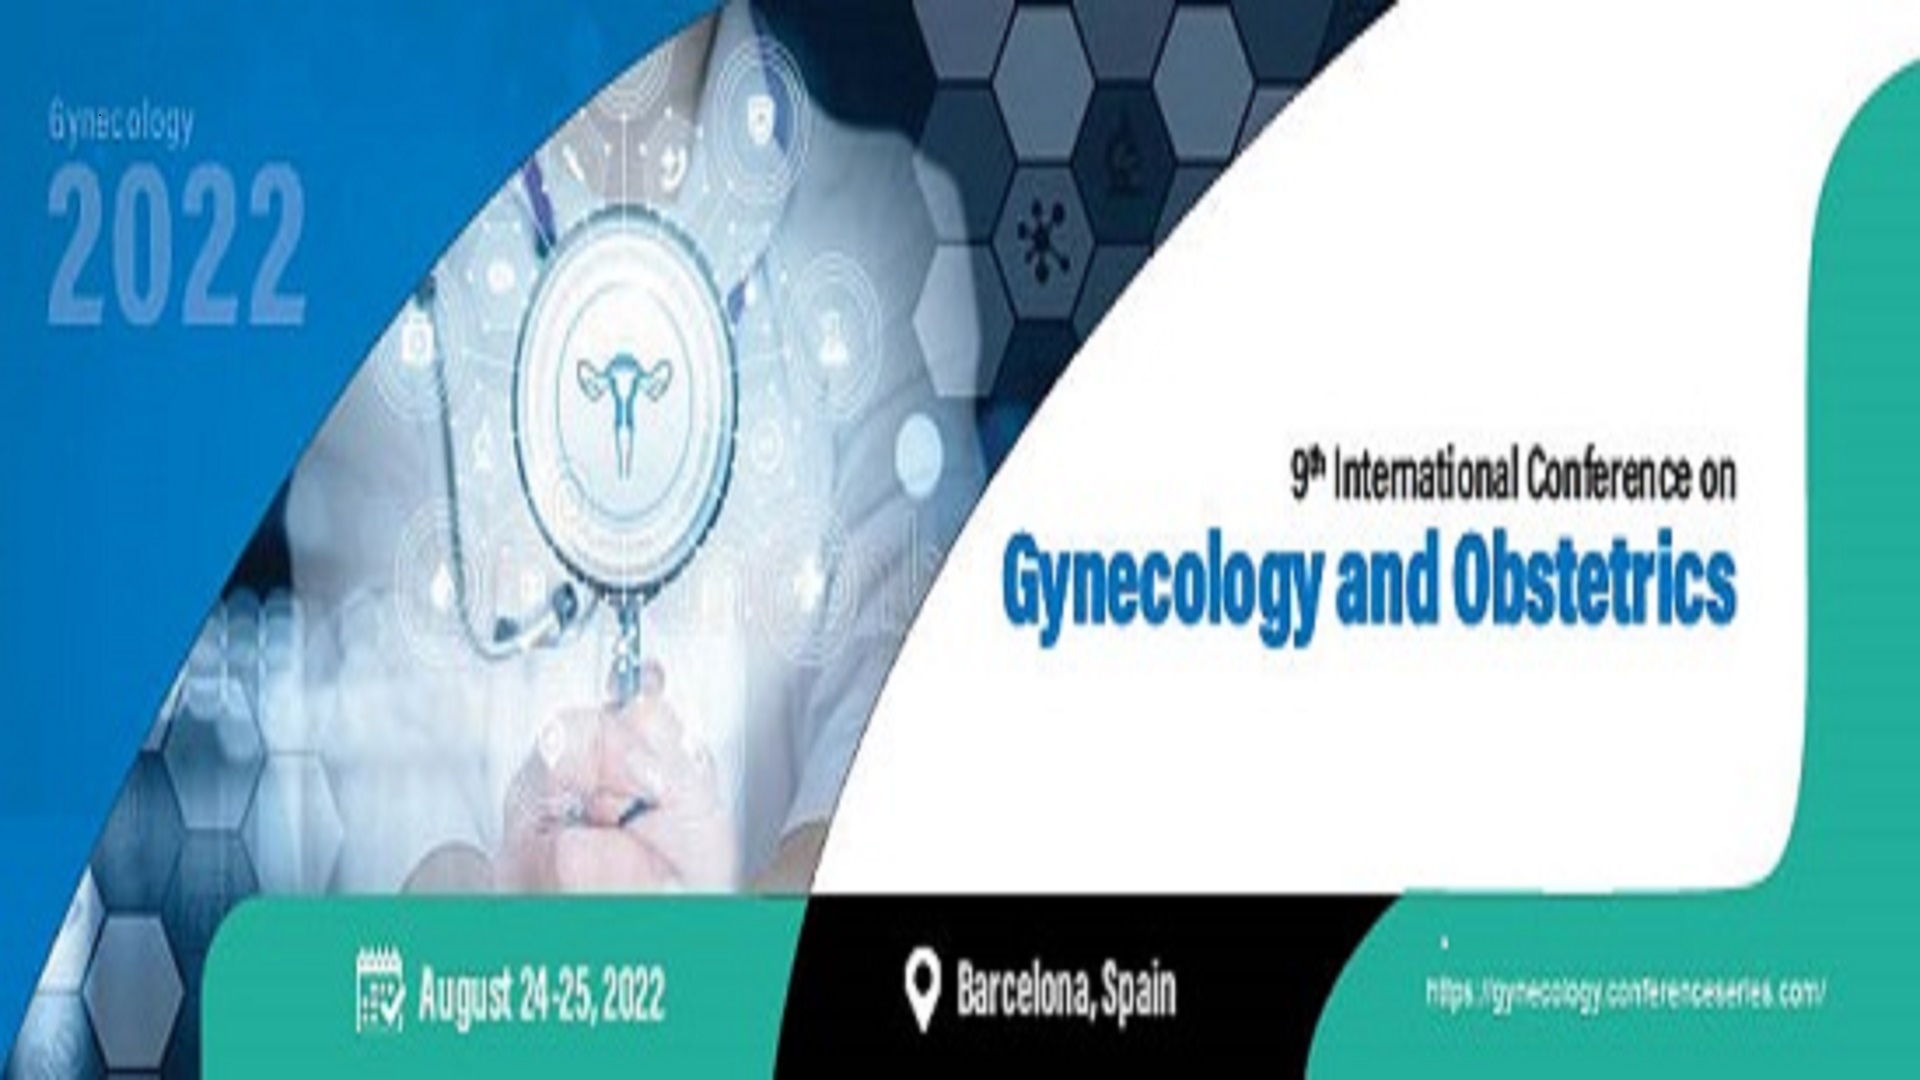 9th International Conference on Gynecology and Obstetrics, Barcelona, London, United Kingdom